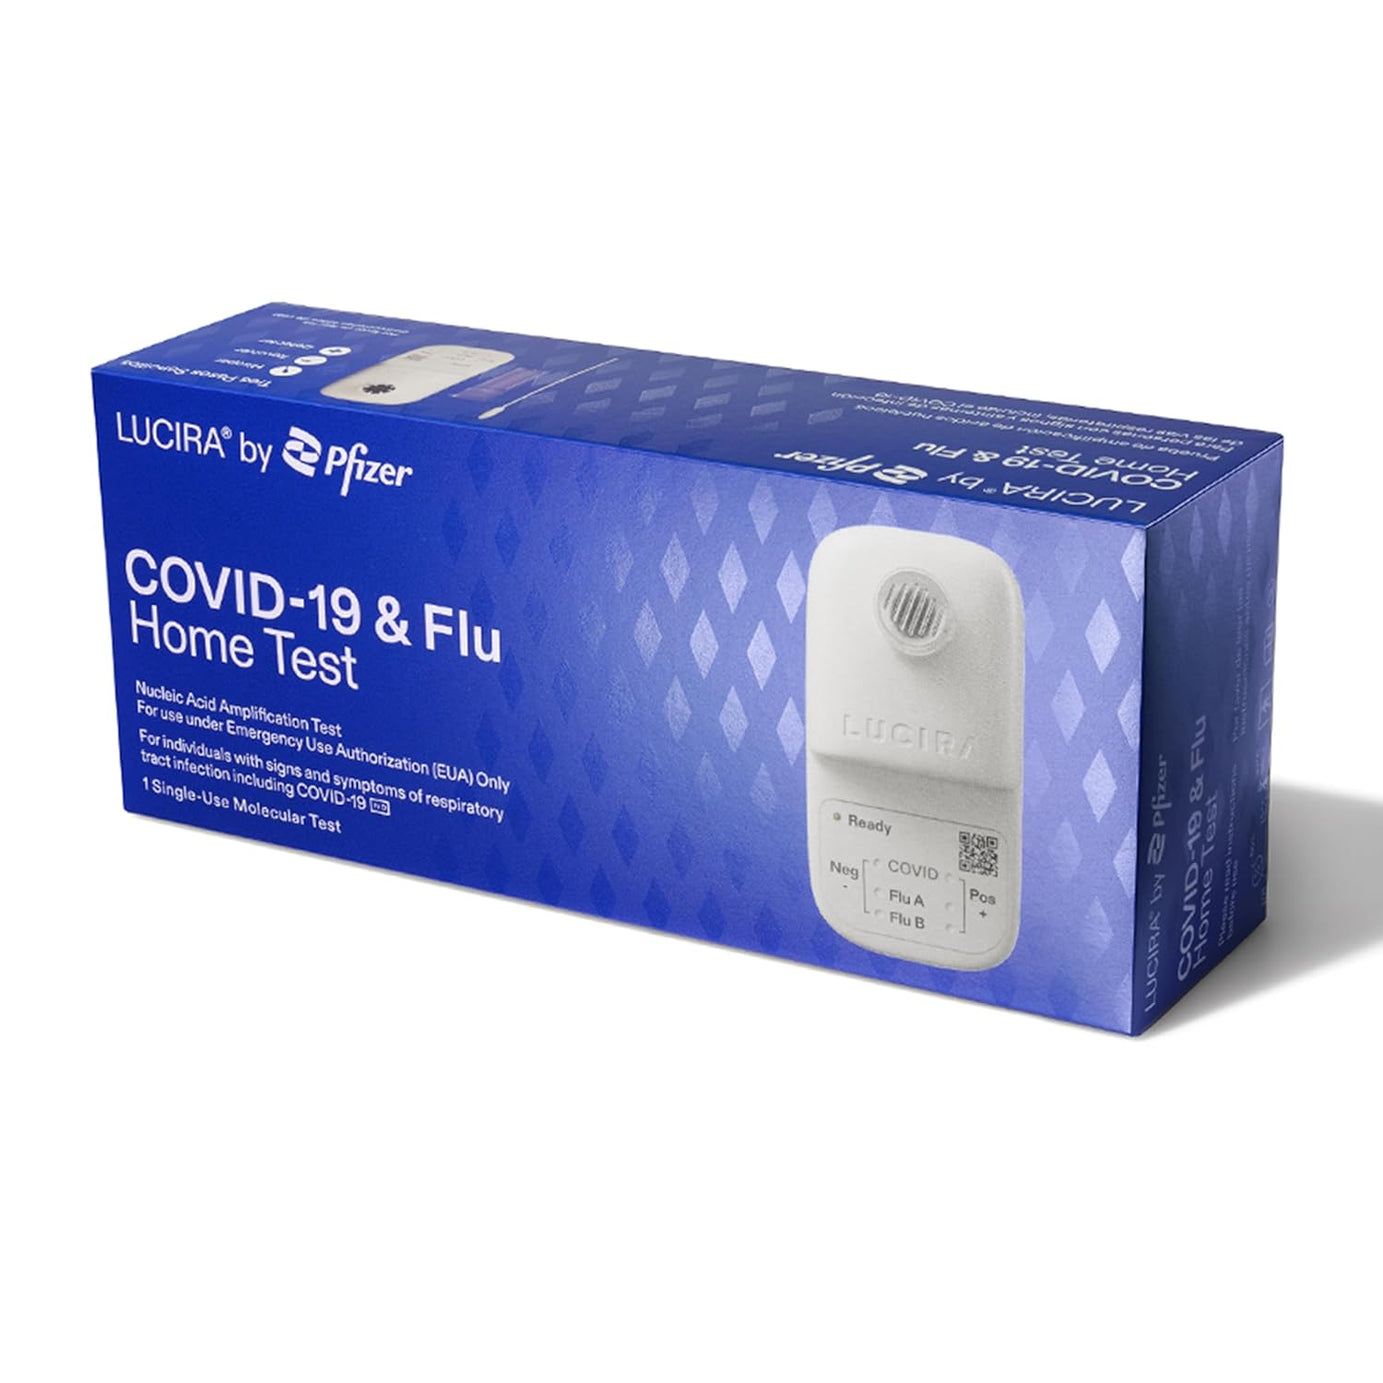 LUCIRA® by Pfizer COVID-19 & Flu Home Test, Results in 30 Minutes, First and Only At-Home Test for COVID-19 and Flu A/B, Emergency Use Authorized (EUA) - Authorized Reseller of Lucira by Pfizer